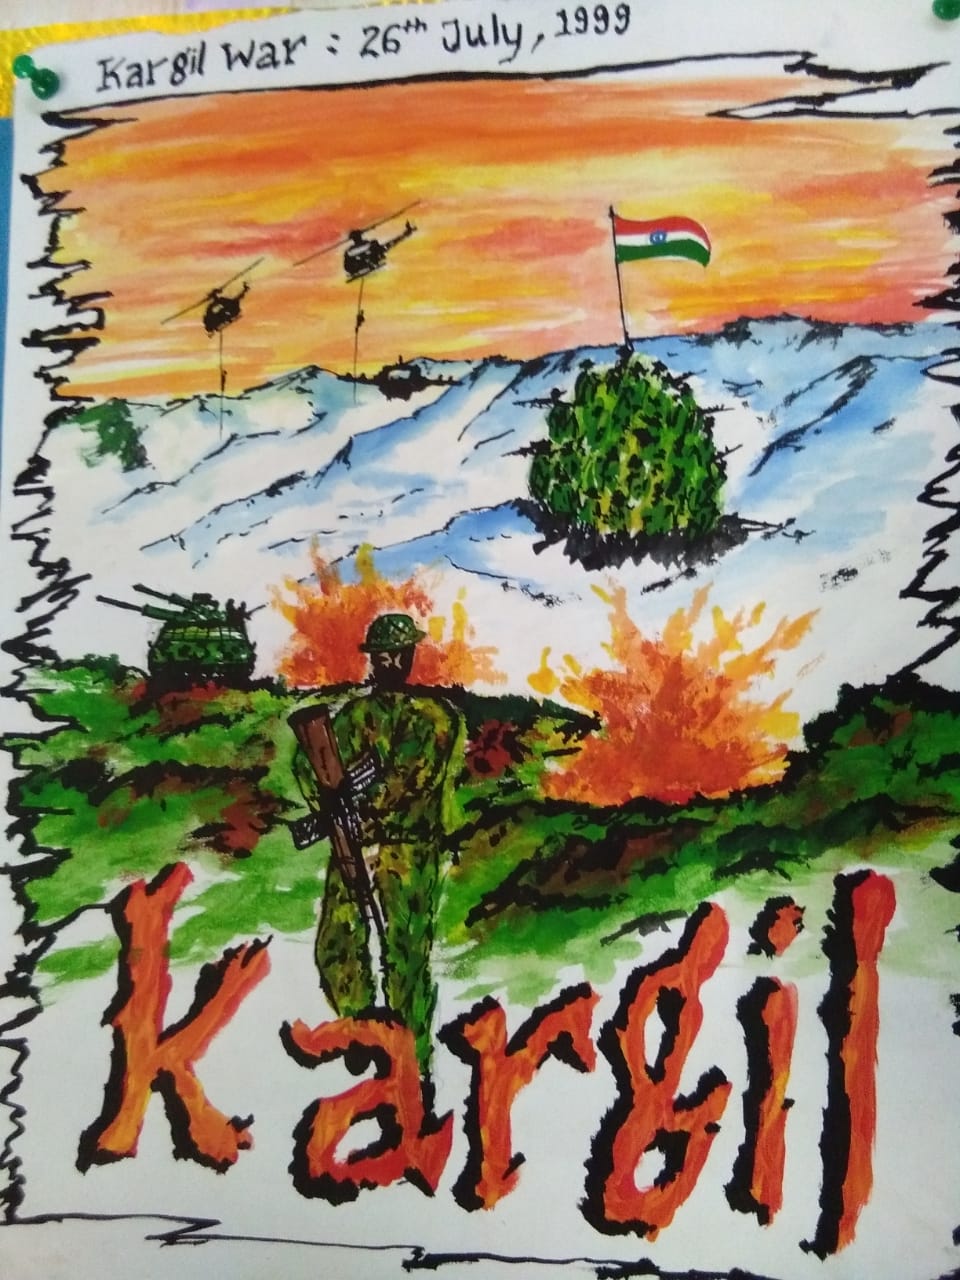 Kargil Diwas Photos, Images and Pictures